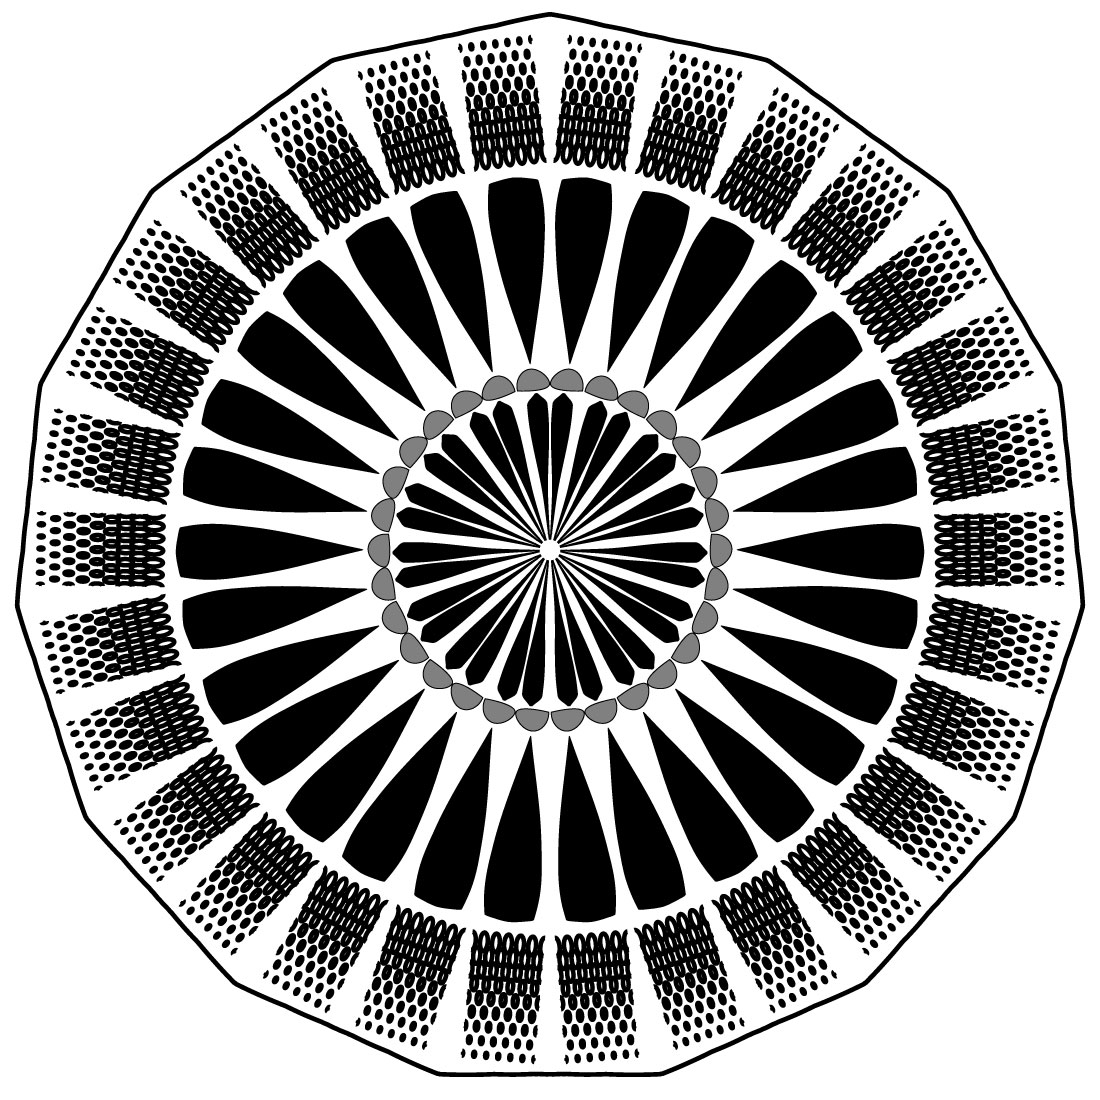 Mandala-Art-with-Rounded-mesh-in-black-and-white preview image.